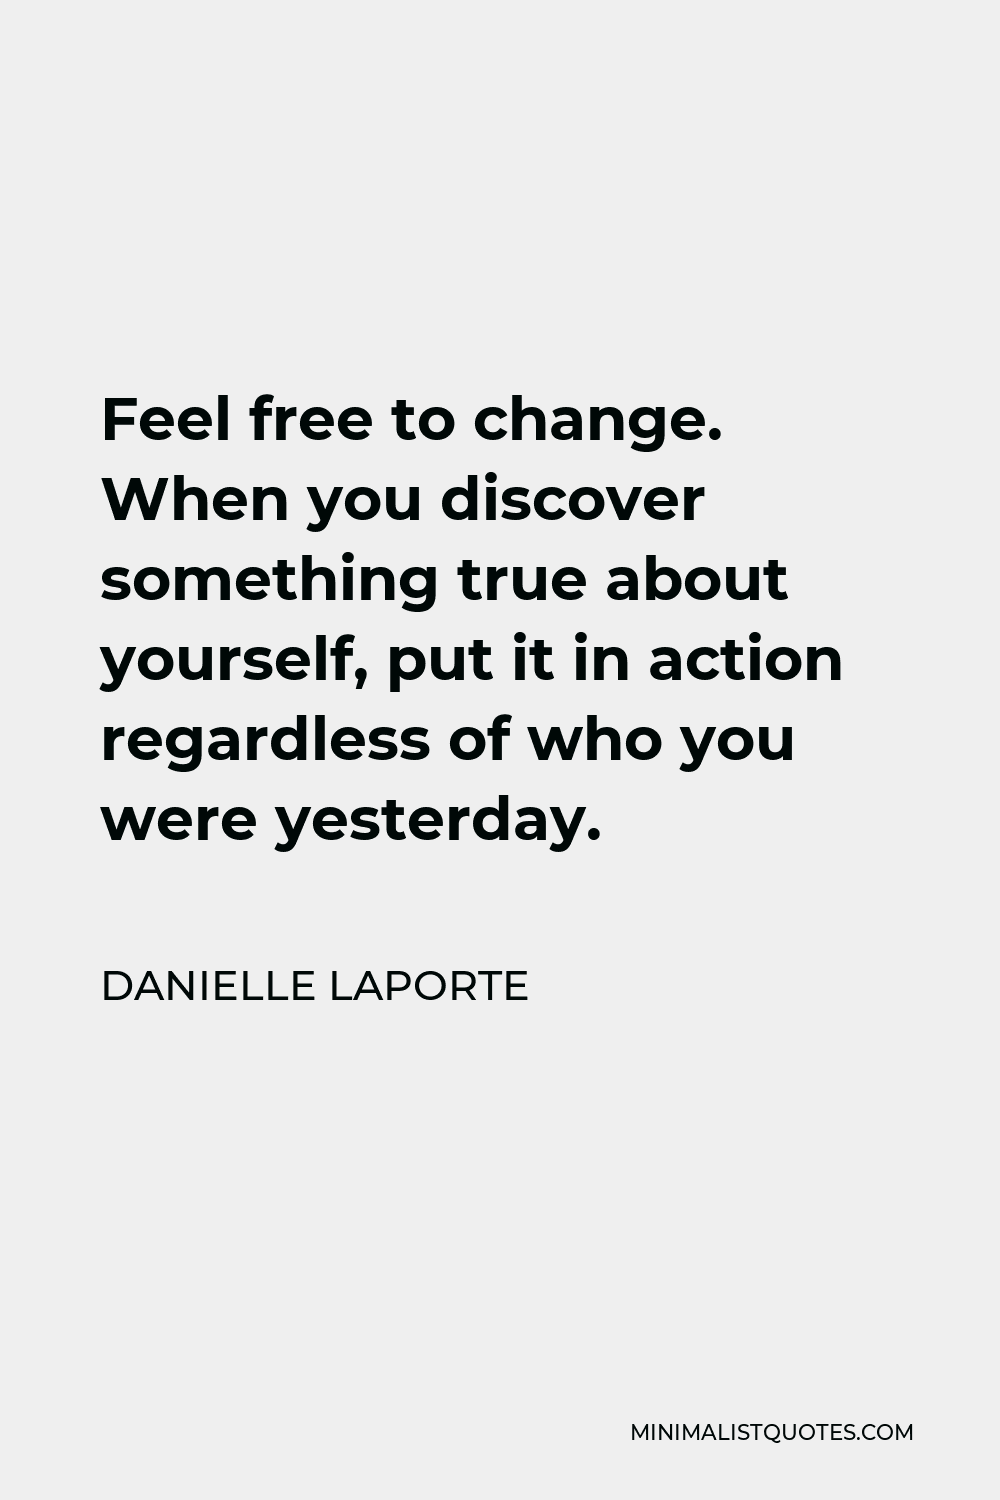 Danielle LaPorte Quote - Feel free to change. When you discover something true about yourself, put it in action regardless of who you were yesterday.